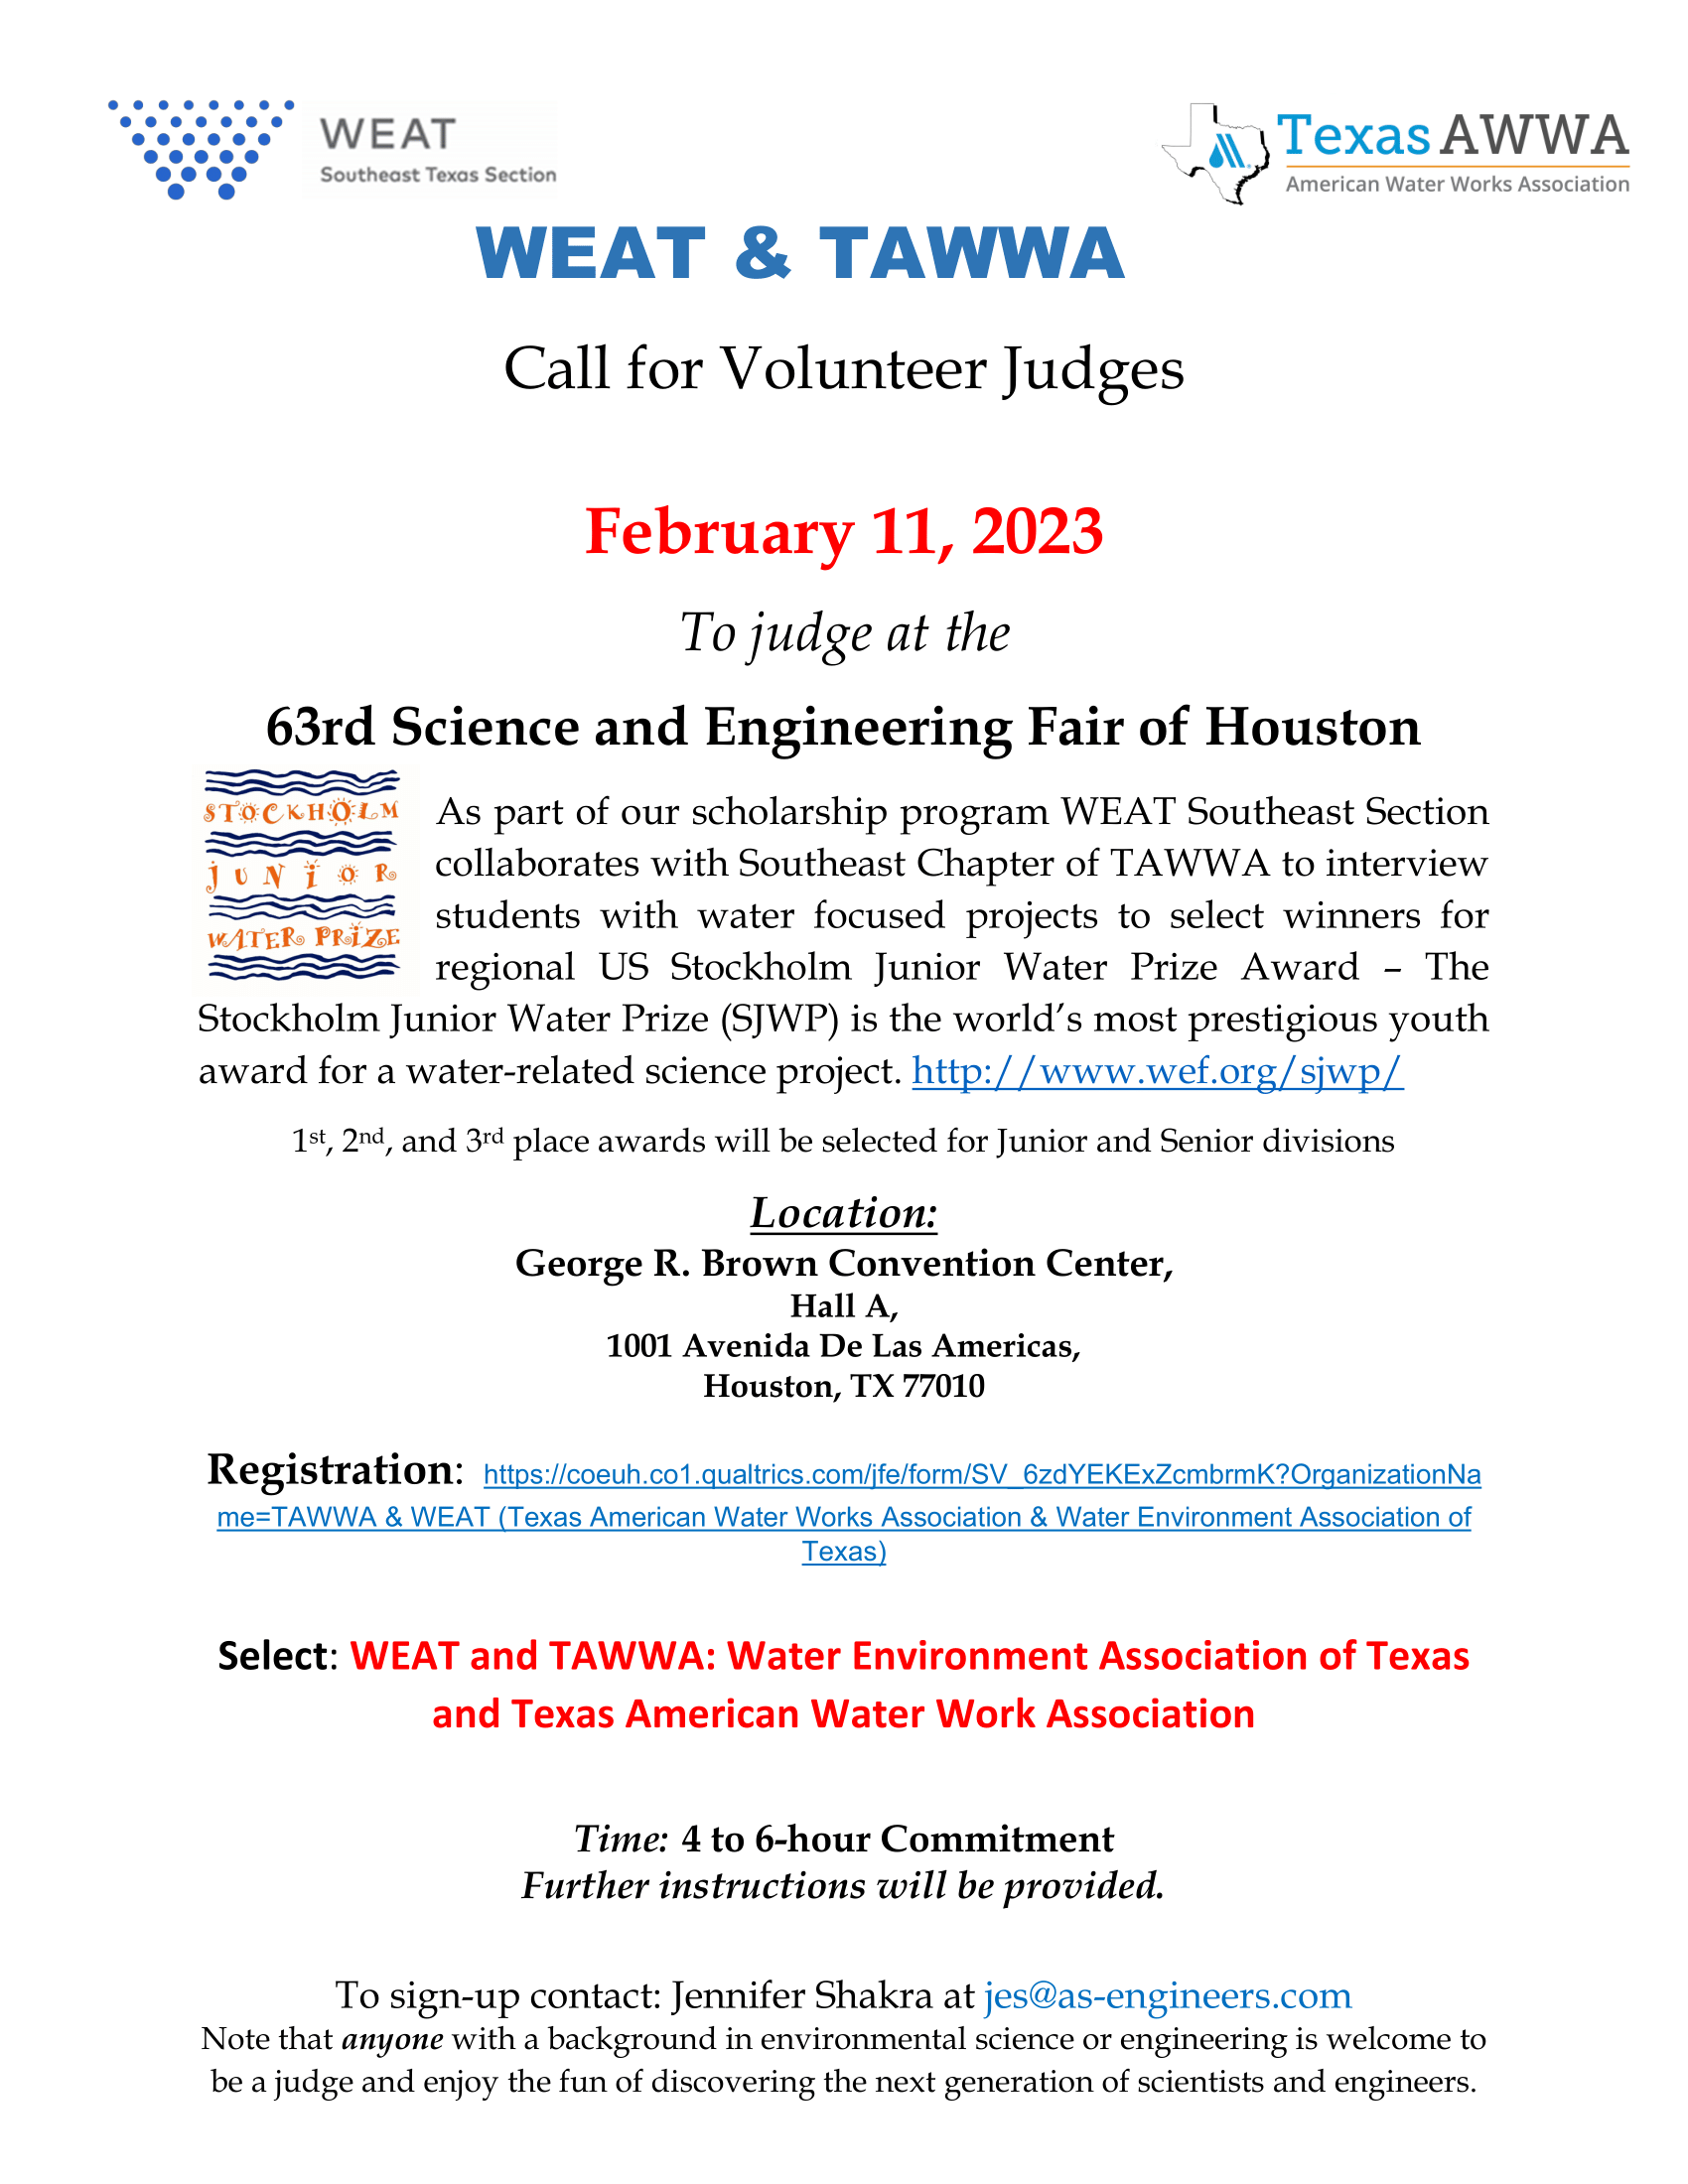 Call for Volunteer Judges – Science and Engineering Fair of Houston 2023